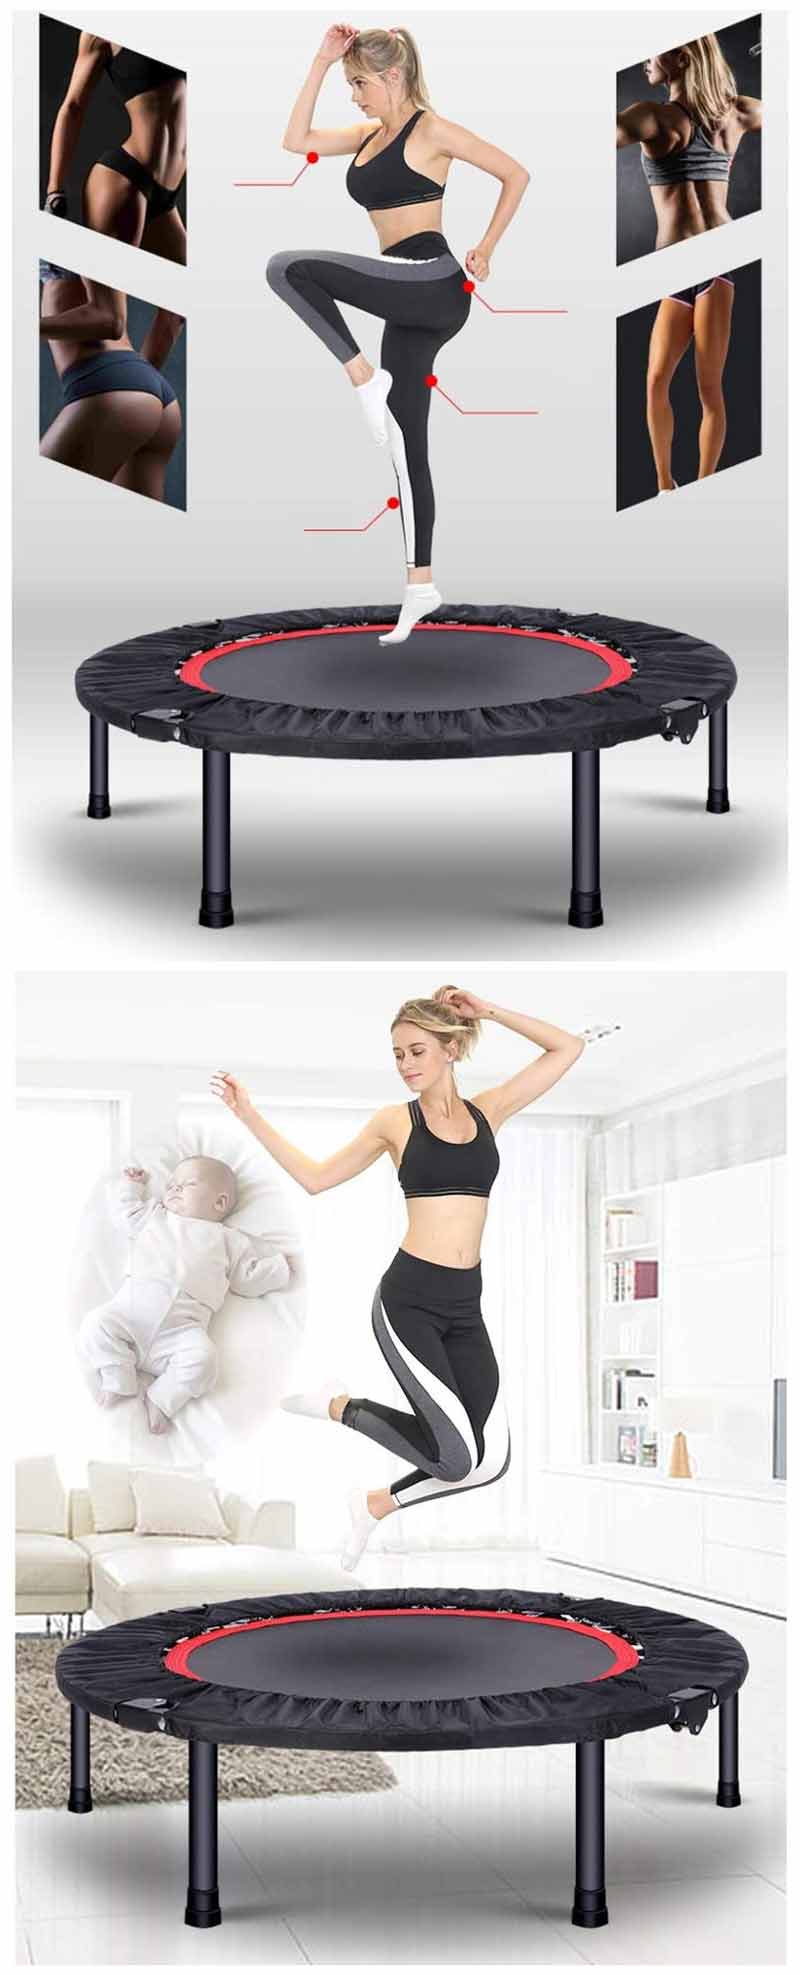 round fitness indoor jumping bungee small trampoline for kids dl s006a 2